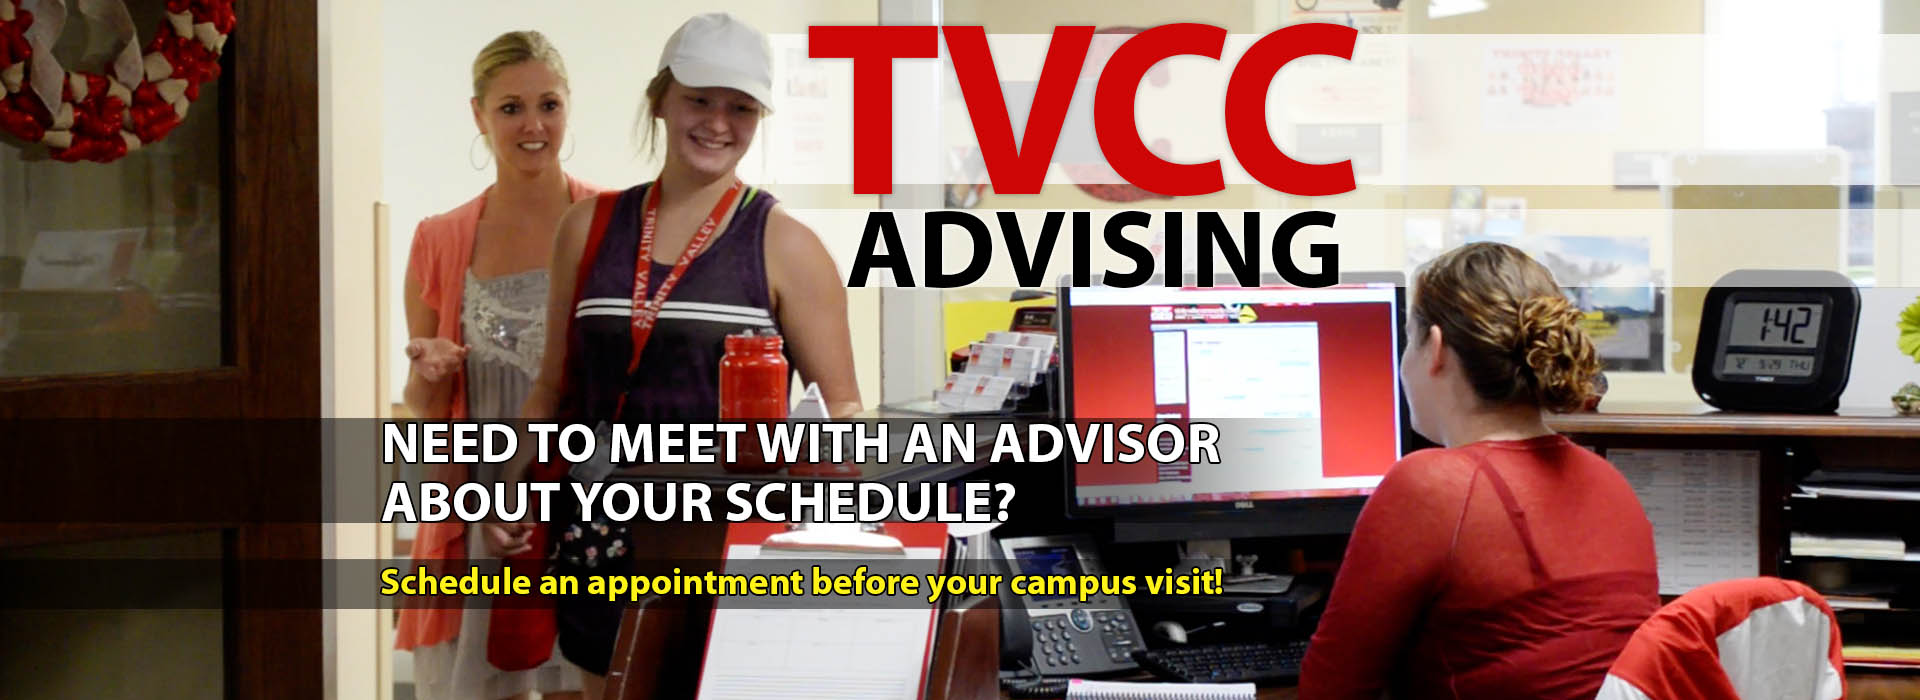 Need to meet with an advisor about your schedule? Schedule an appointment before your campus visit!